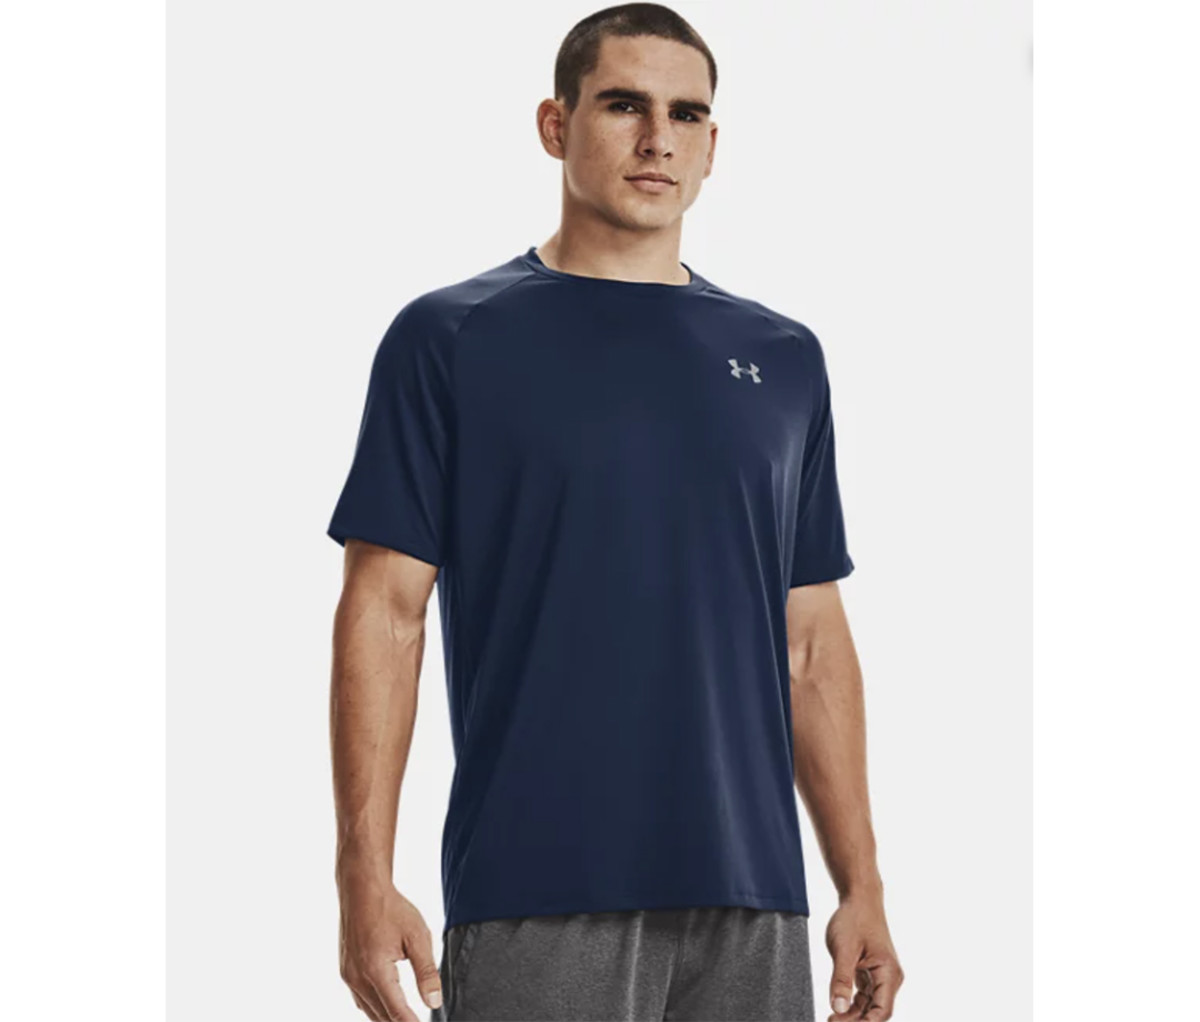 Black Friday Has Finally Arrived to Under Armour - Men's Journal